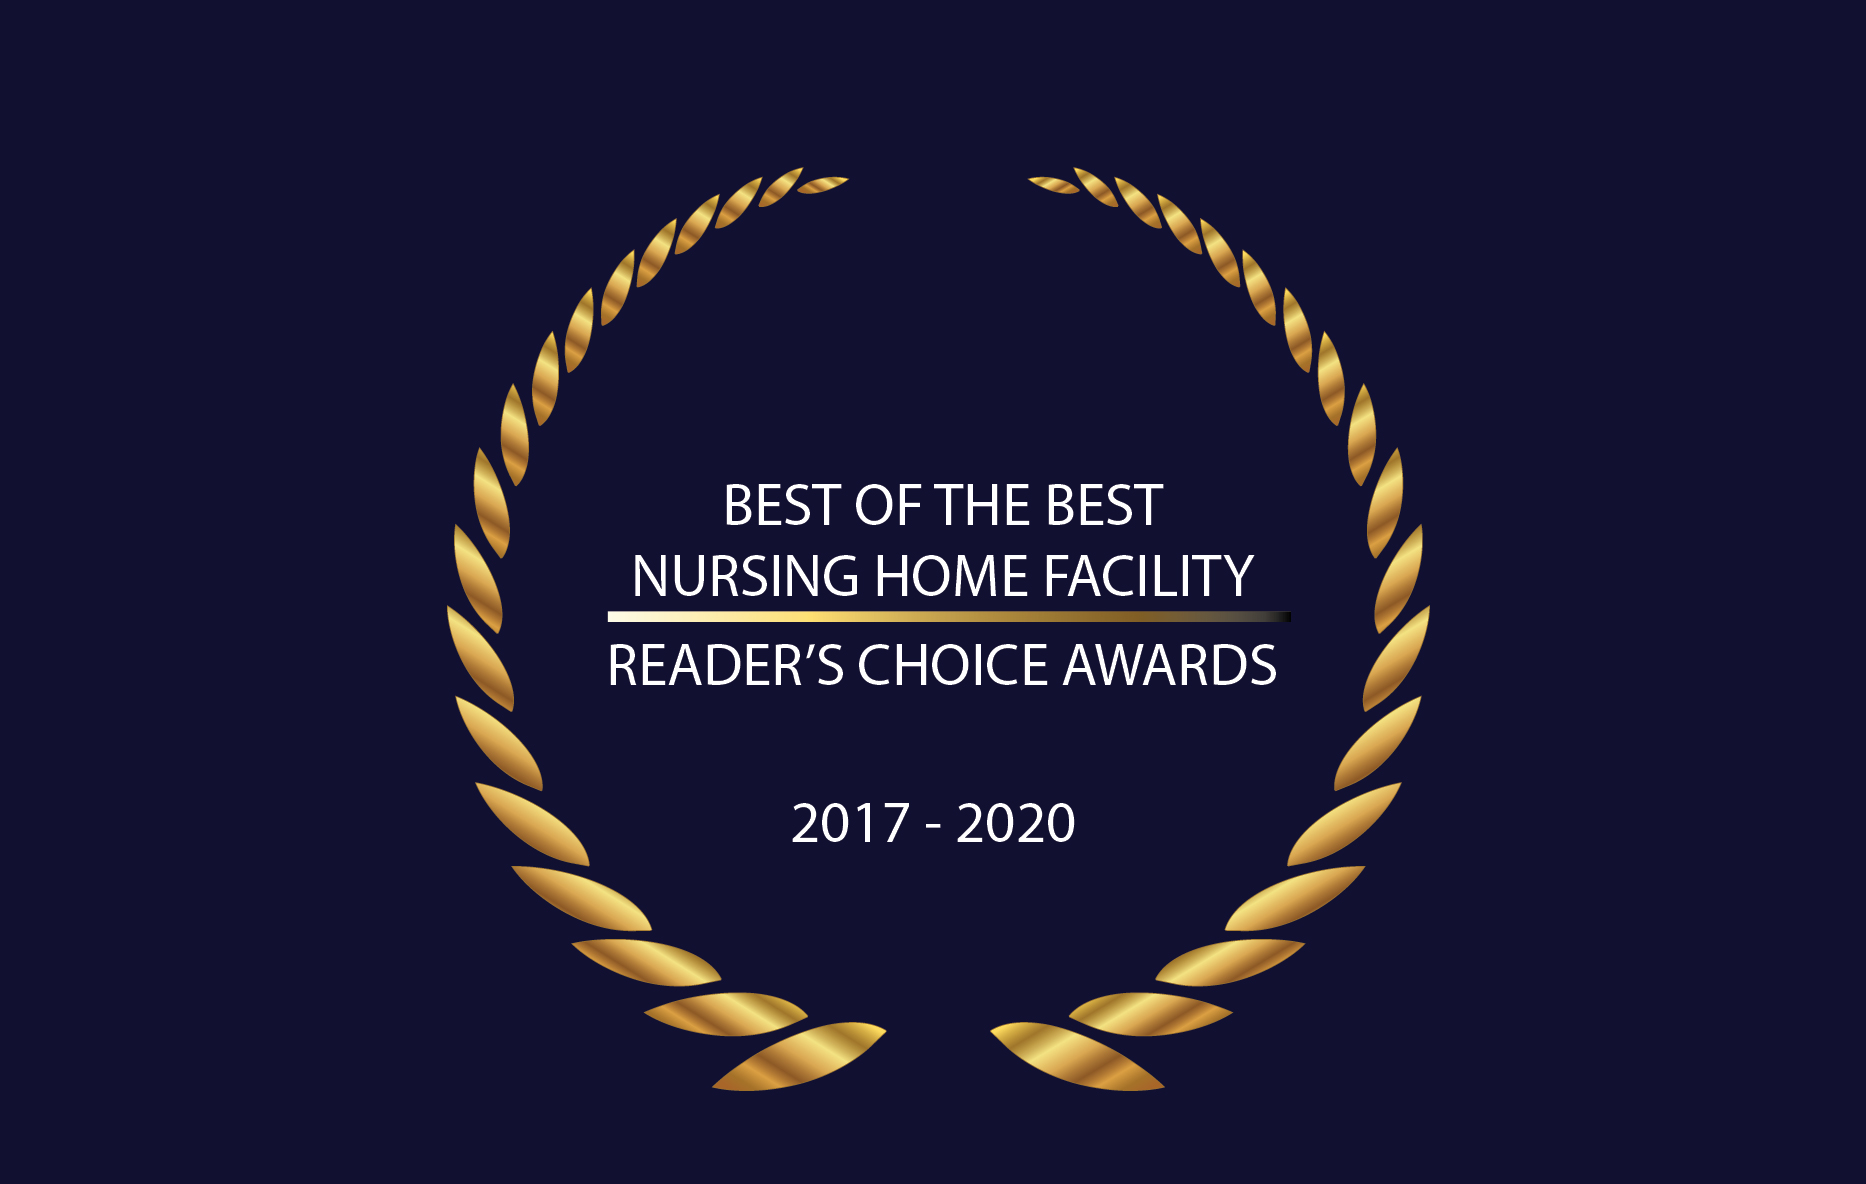 Best of the Best Nursing Home Facility